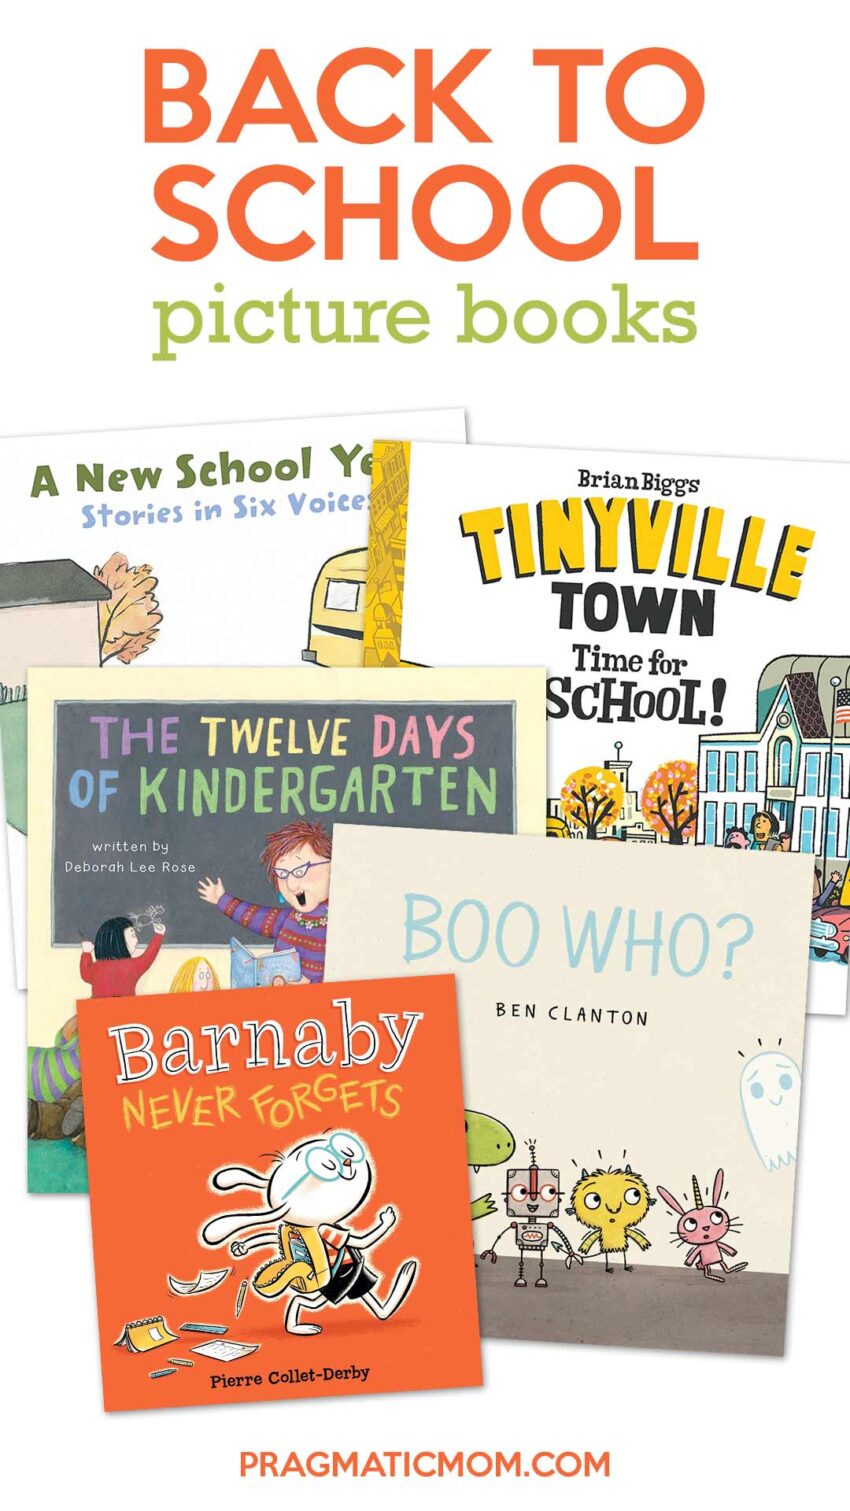 Back to School Picture Books